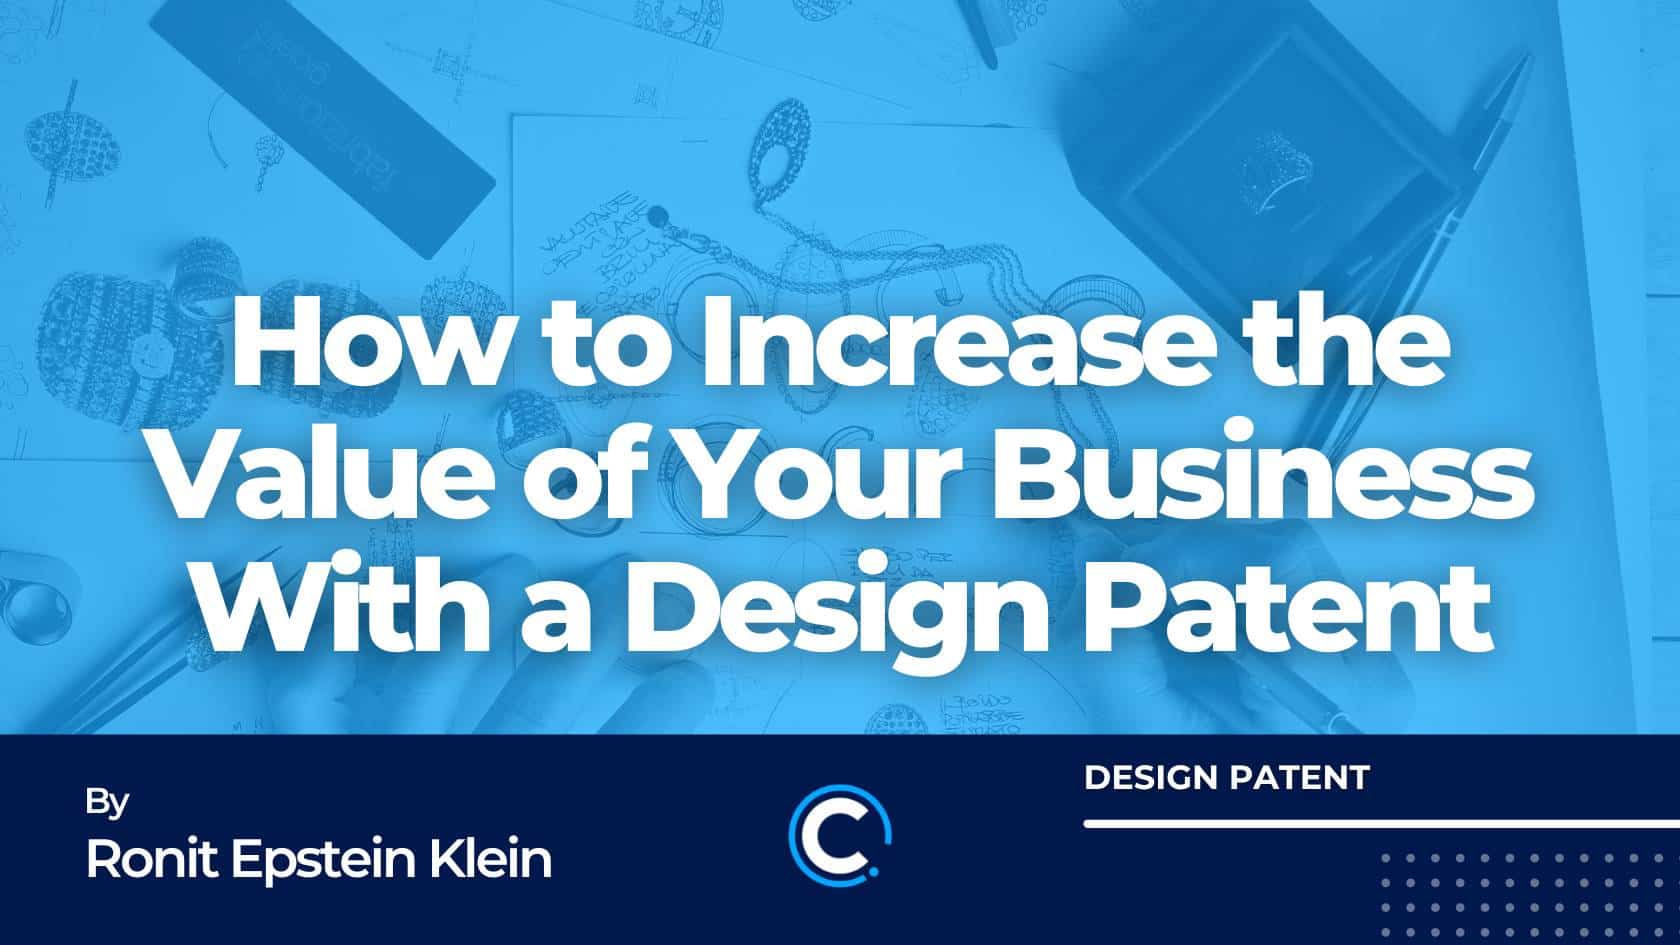 How-to-Increase-the-Value-of-Your-Business-With-a-Design-Patent1.jpg